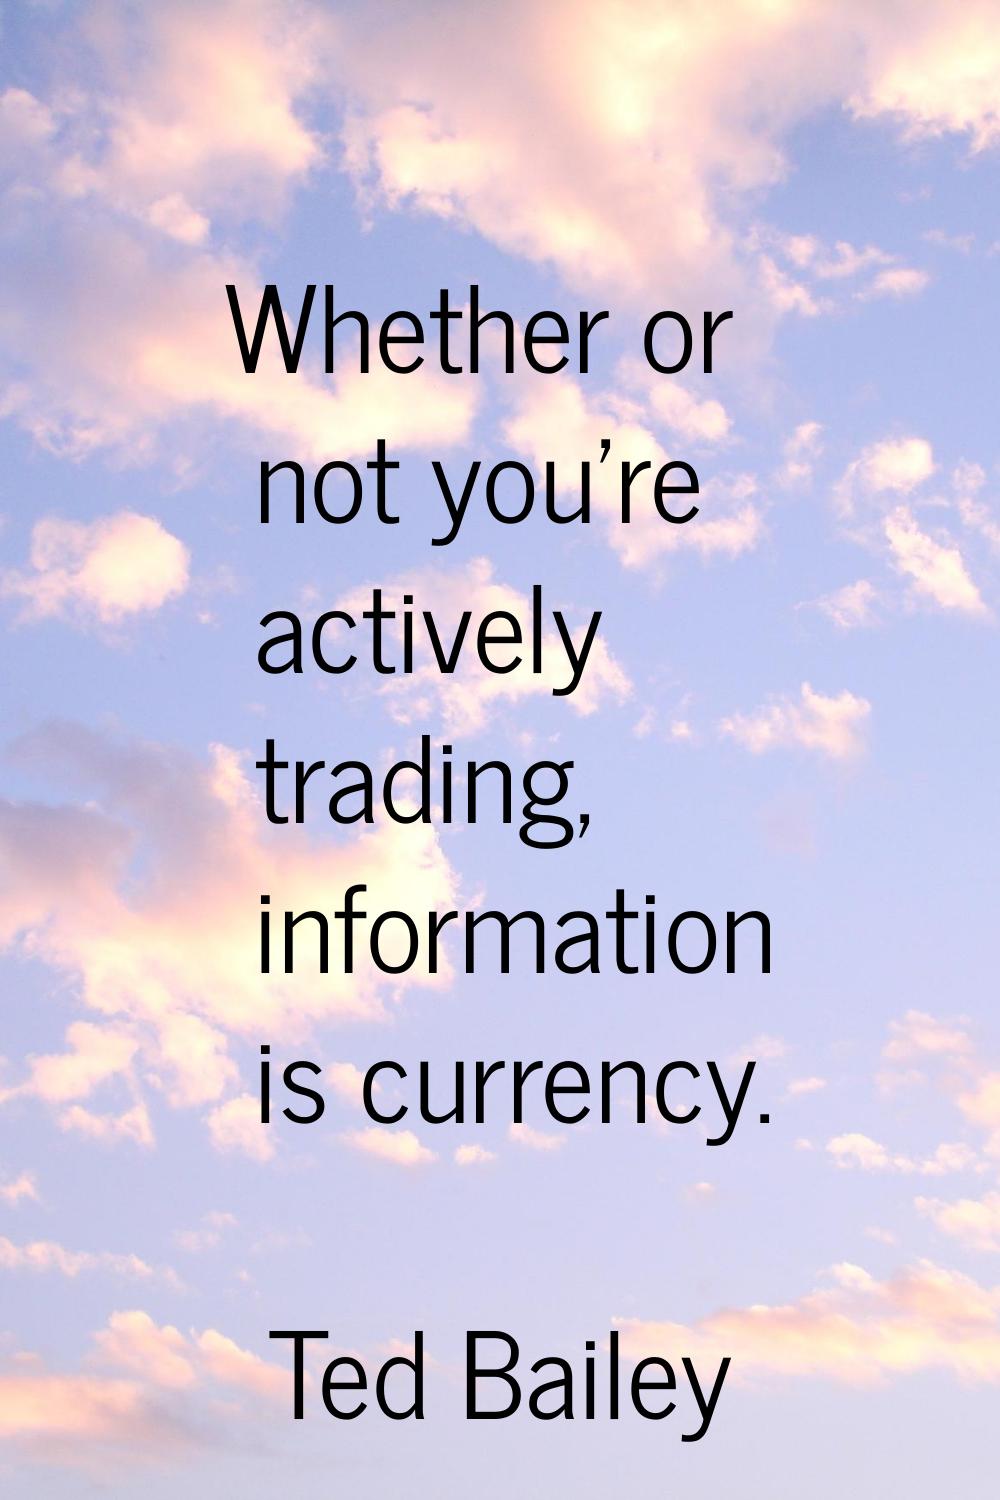 Whether or not you're actively trading, information is currency.